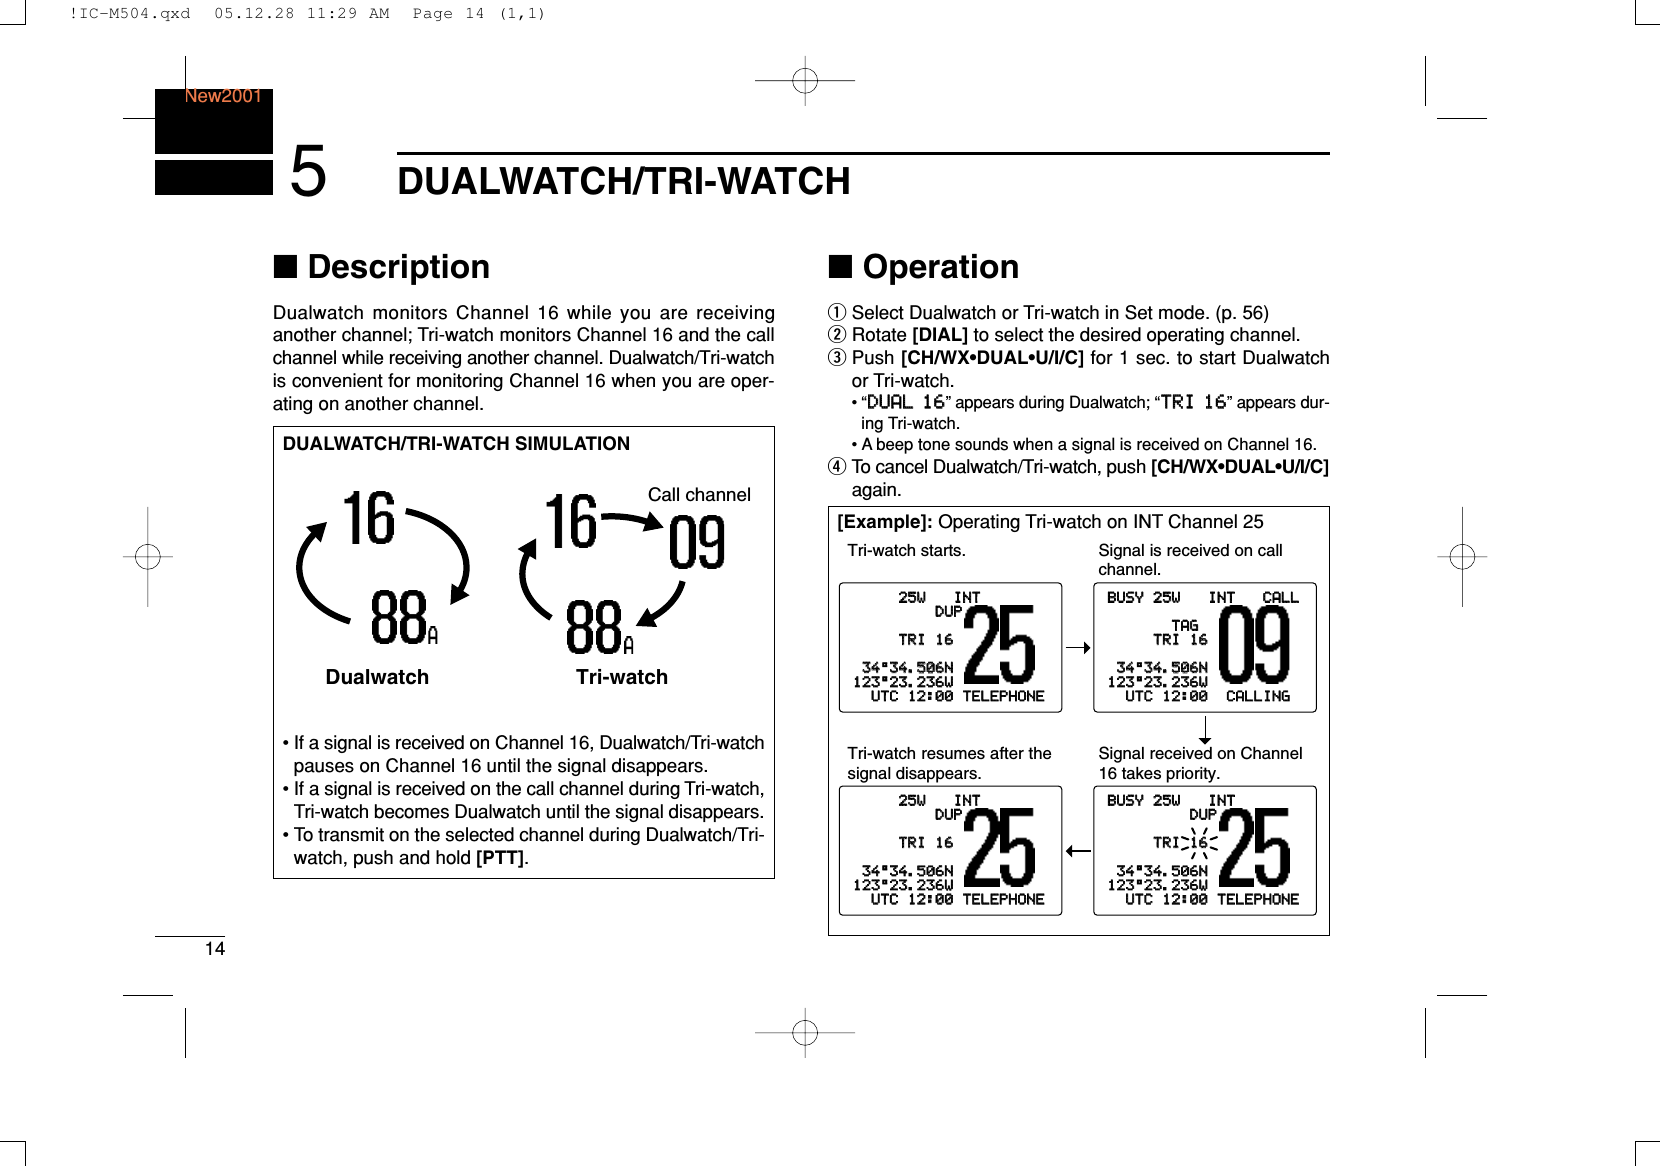 14DUALWATCH/TRI-WATCHNew20015■DescriptionDualwatch monitors Channel 16 while you are receiving another channel; Tri-watch monitors Channel 16 and the callchannel while receiving another channel. Dualwatch/Tri-watchis convenient for monitoring Channel 16 when you are oper-ating on another channel.■OperationqSelect Dualwatch or Tri-watch in Set mode. (p. 56)wRotate [DIAL] to select the desired operating channel.ePush [CH/WX•DUAL•U/I/C] for 1 sec. to start Dualwatchor Tri-watch.•“DDUUAALL 1166” appears during Dualwatch; “TTRRII 1166” appears dur-ing Tri-watch.• A beep tone sounds when a signal is received on Channel 16.rTo cancel Dualwatch/Tri-watch, push [CH/WX•DUAL•U/I/C]again.DUALWATCH/TRI-WATCH SIMULATION• If a signal is received on Channel 16, Dualwatch/Tri-watchpauses on Channel 16 until the signal disappears.• If a signal is received on the call channel during Tri-watch,Tri-watch becomes Dualwatch until the signal disappears.• To transmit on the selected channel during Dualwatch/Tri-watch, push and hold [PTT].Dualwatch Tri-watchCall channel[Example]: Operating Tri-watch on INT Channel 2525W25W INTINTDUPDUPTRITRI 16163434°34.506N34.506N123123°23.236W23.236WUTCUTC 1212:00:00 TELEPHONETELEPHONEBUSYBUSY 25W25W INTINT CALLCALLTAGTAGTRITRI 16163434°34.506N34.506N123123°23.236W23.236WUTCUTC 1212:00:00 CALLINGCALLINGTri-watch starts. Signal is received on call channel.BUSYBUSY 25W25W INTINTDUPDUPTRITRI 16163434°34.506N34.506N123123°23.236W23.236WUTCUTC 1212:00:00 TELEPHONETELEPHONESignal received on Channel 16 takes priority.25W25W INTINTDUPDUPTRITRI 16163434°34.506N34.506N123123°23.236W23.236WUTCUTC 1212:00:00 TELEPHONETELEPHONETri-watch resumes after the signal disappears.!IC-M504.qxd  05.12.28 11:29 AM  Page 14 (1,1)